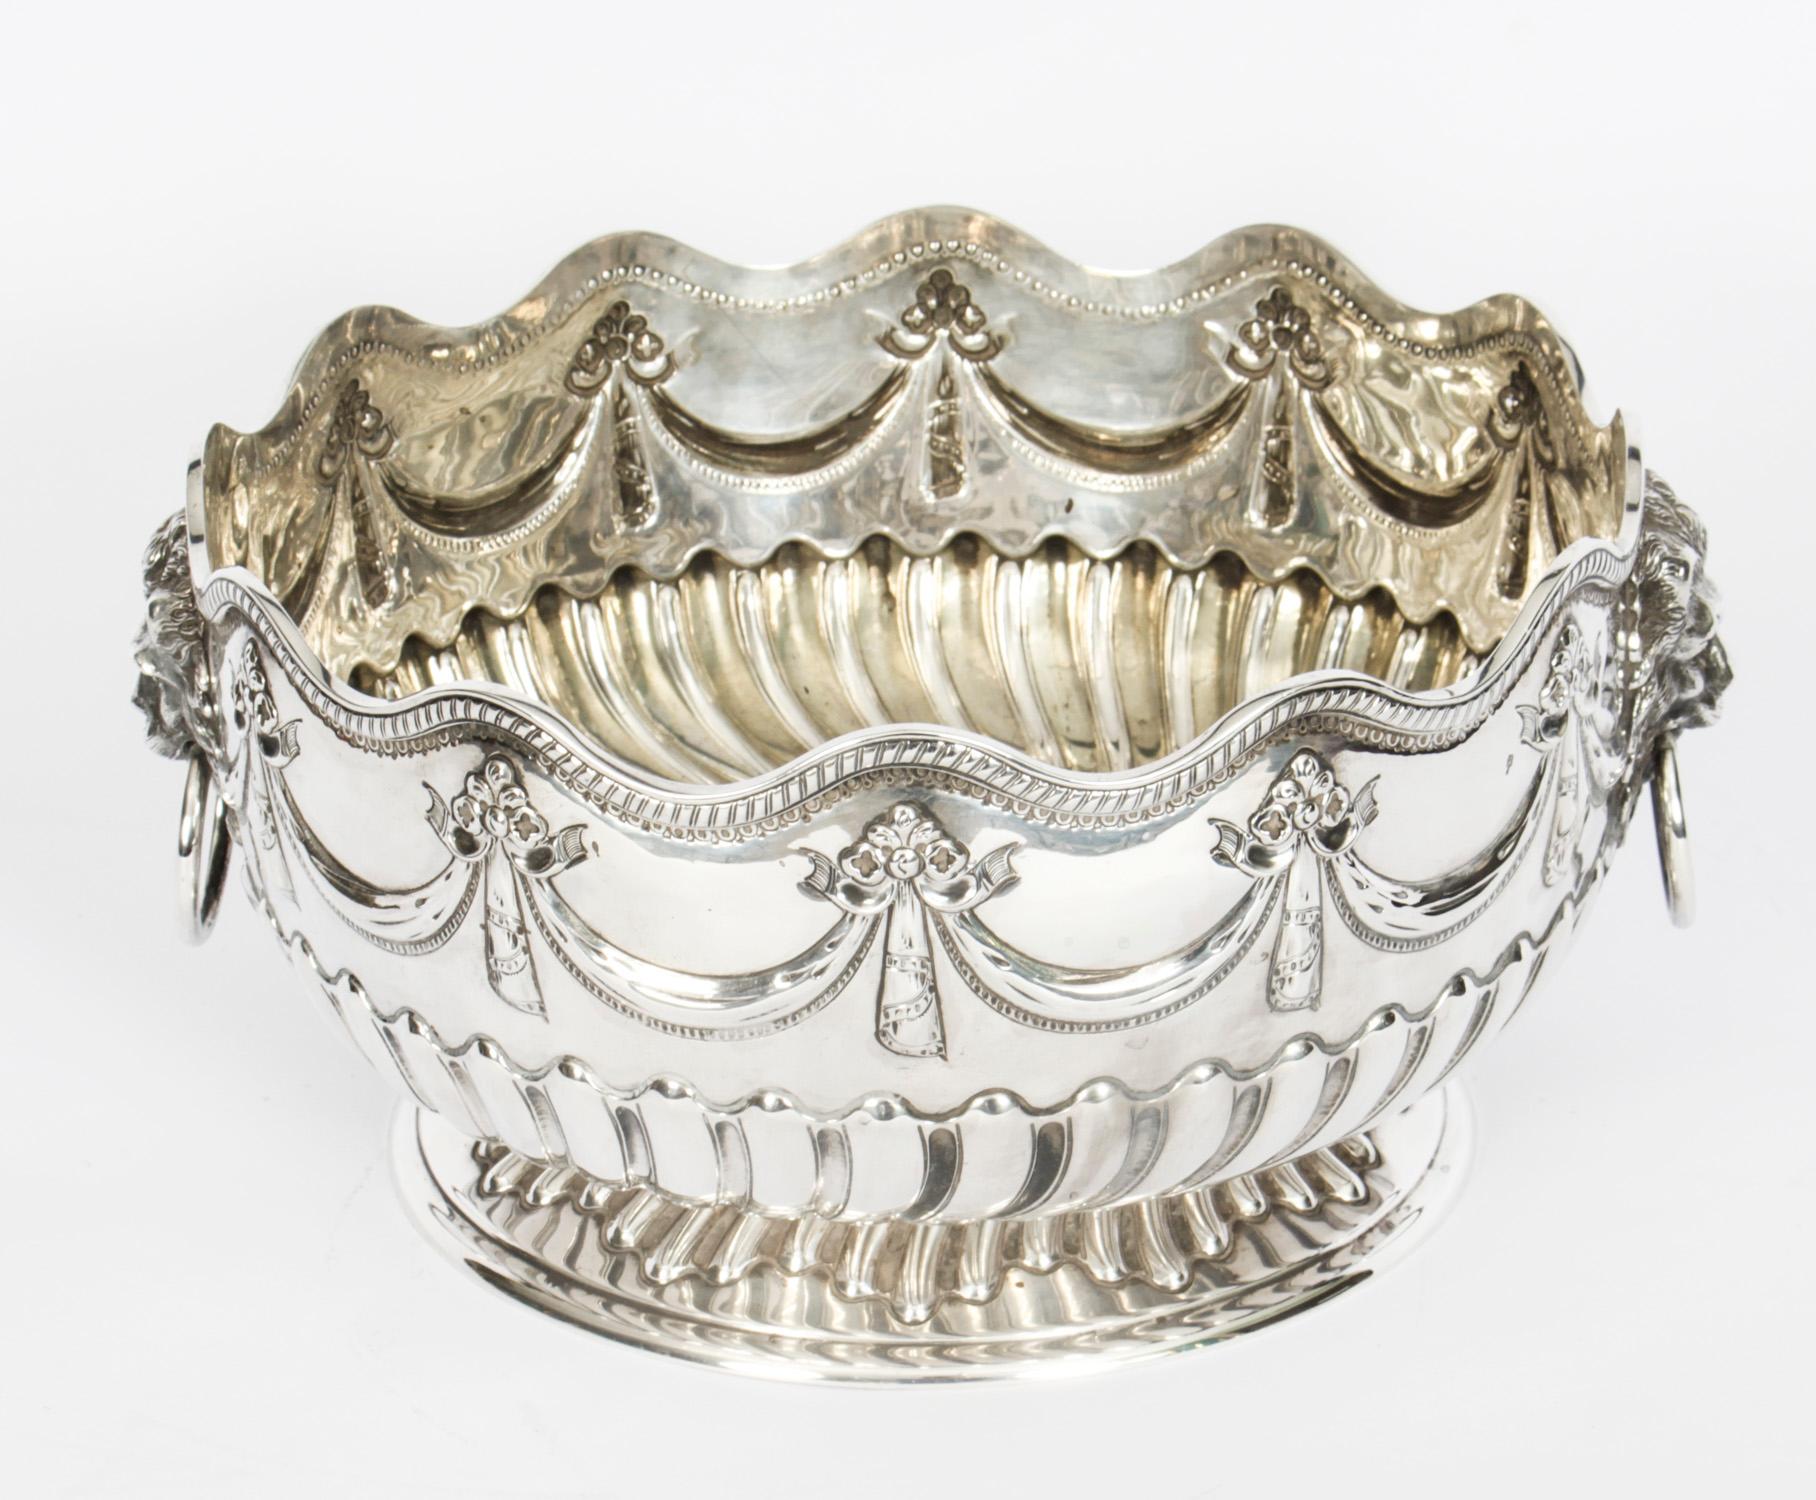 This is a large gorgeous antique Victorian sterling silver punch bowl bearing the makers mark of the renowned silversmiths Frederick Elkington, of Elkington & Co and hallmarks for Sheffield 1884.
 
This exquisite punch bowl is also ideal as a